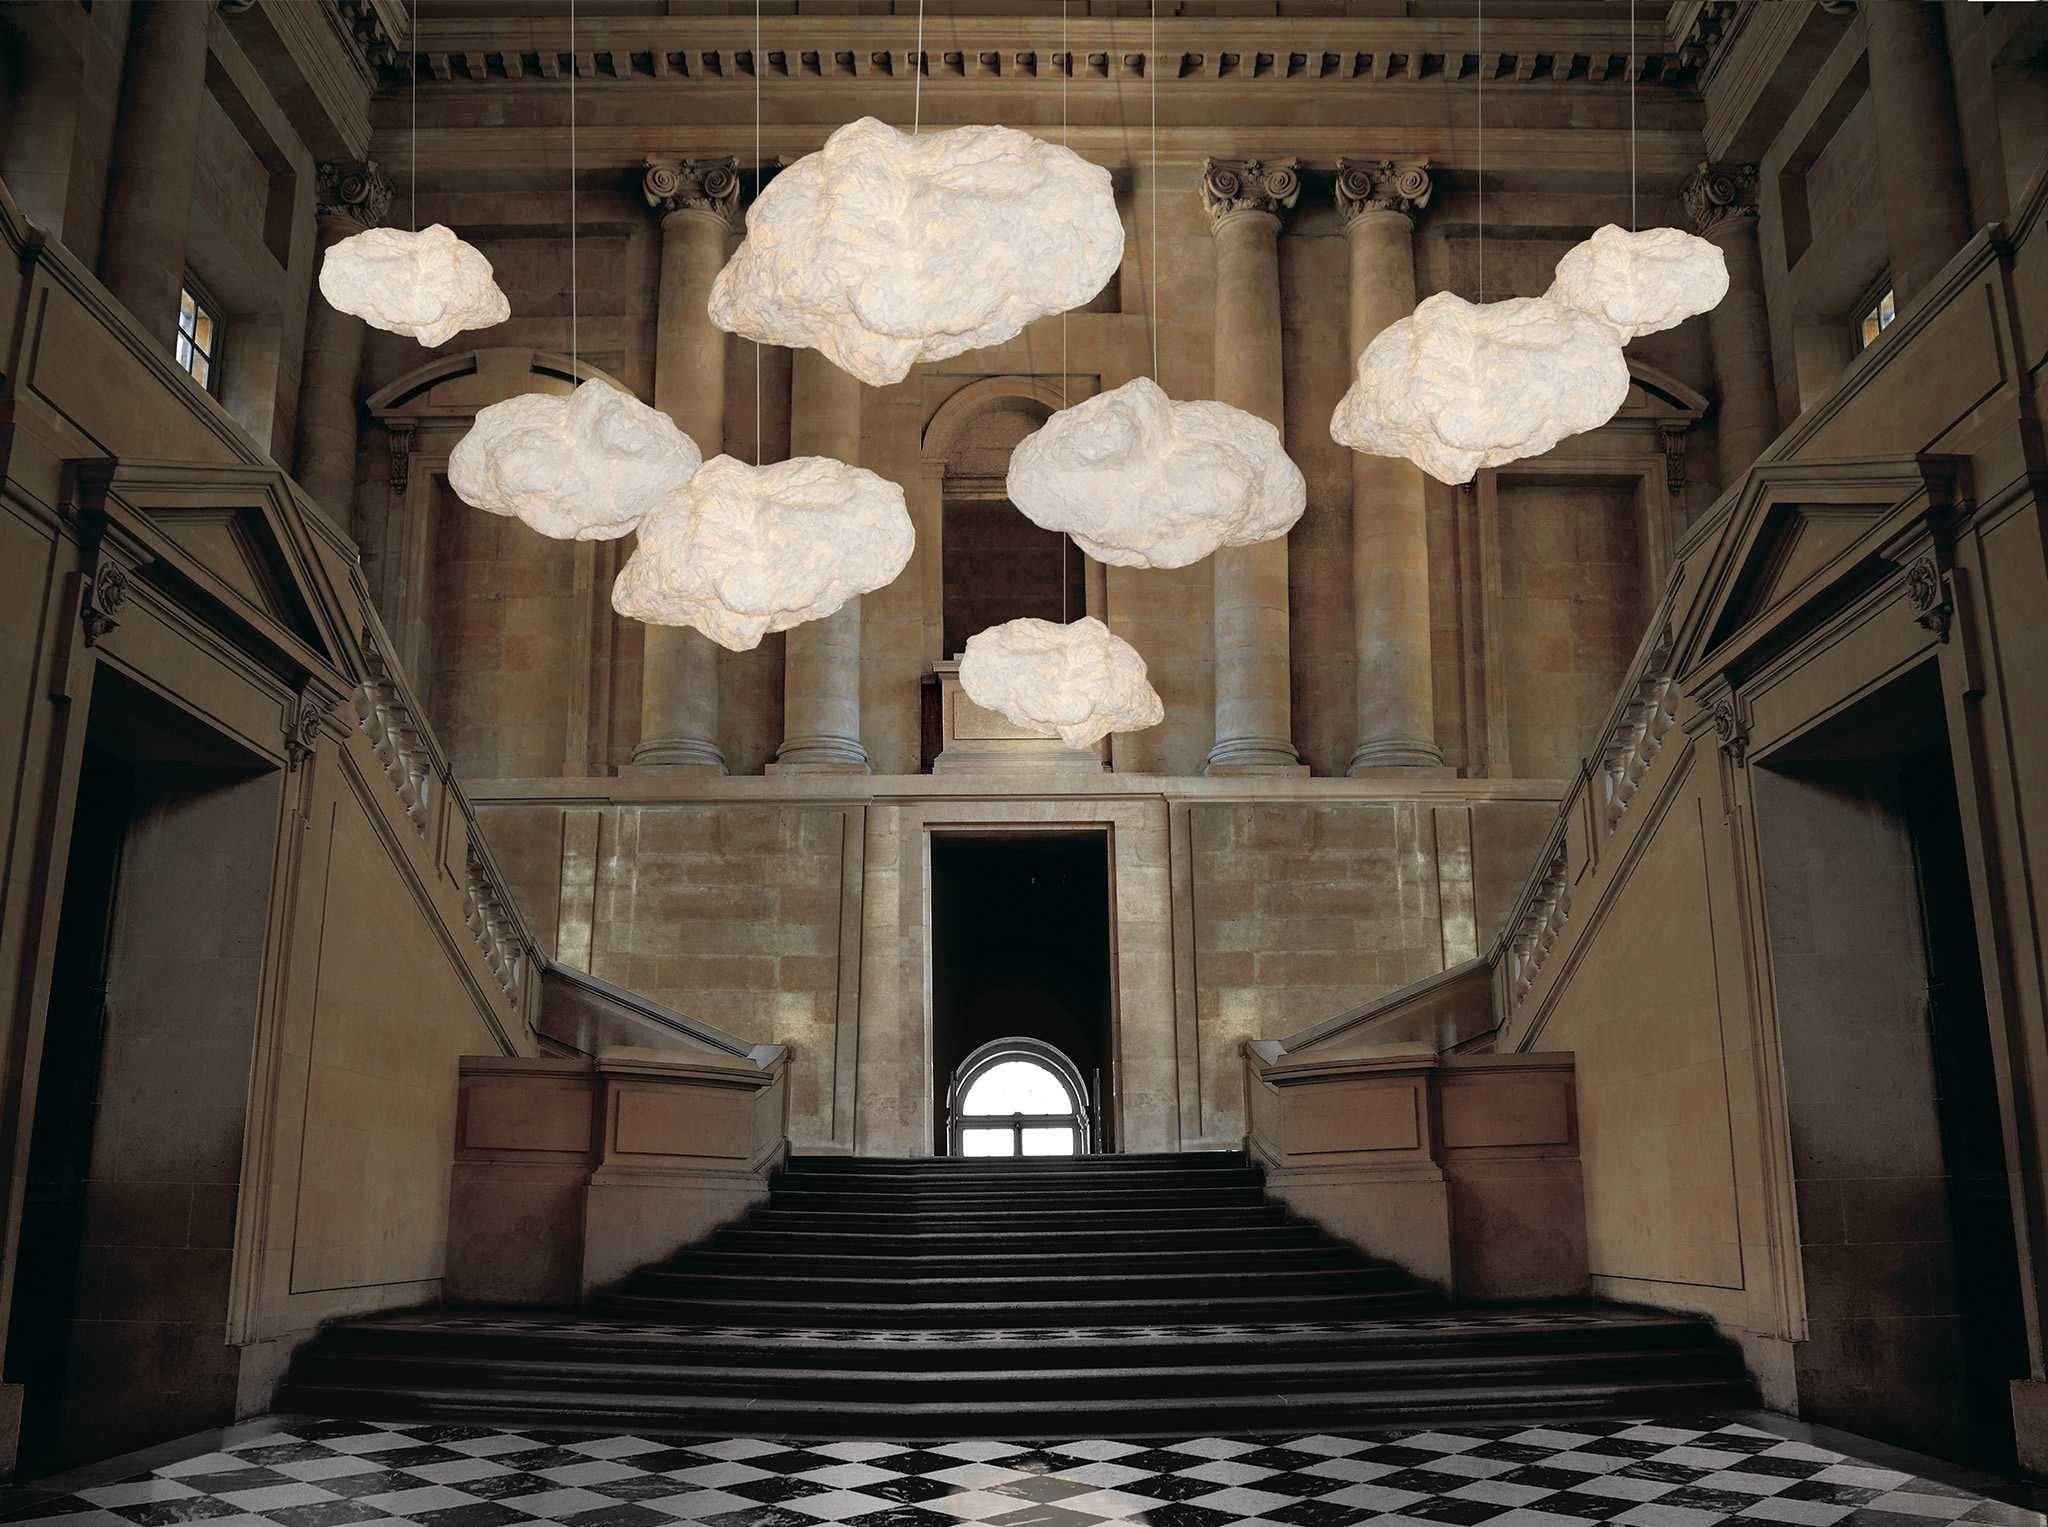 Cloud suspensions - designed by Hae Young Yoon.

Thin cotton fiber is blown into shape by seemingly weightless wire armatures. The delicate forms are stronger than they appear and can be reshaped by hand.
Materials: cotton, powder-coated